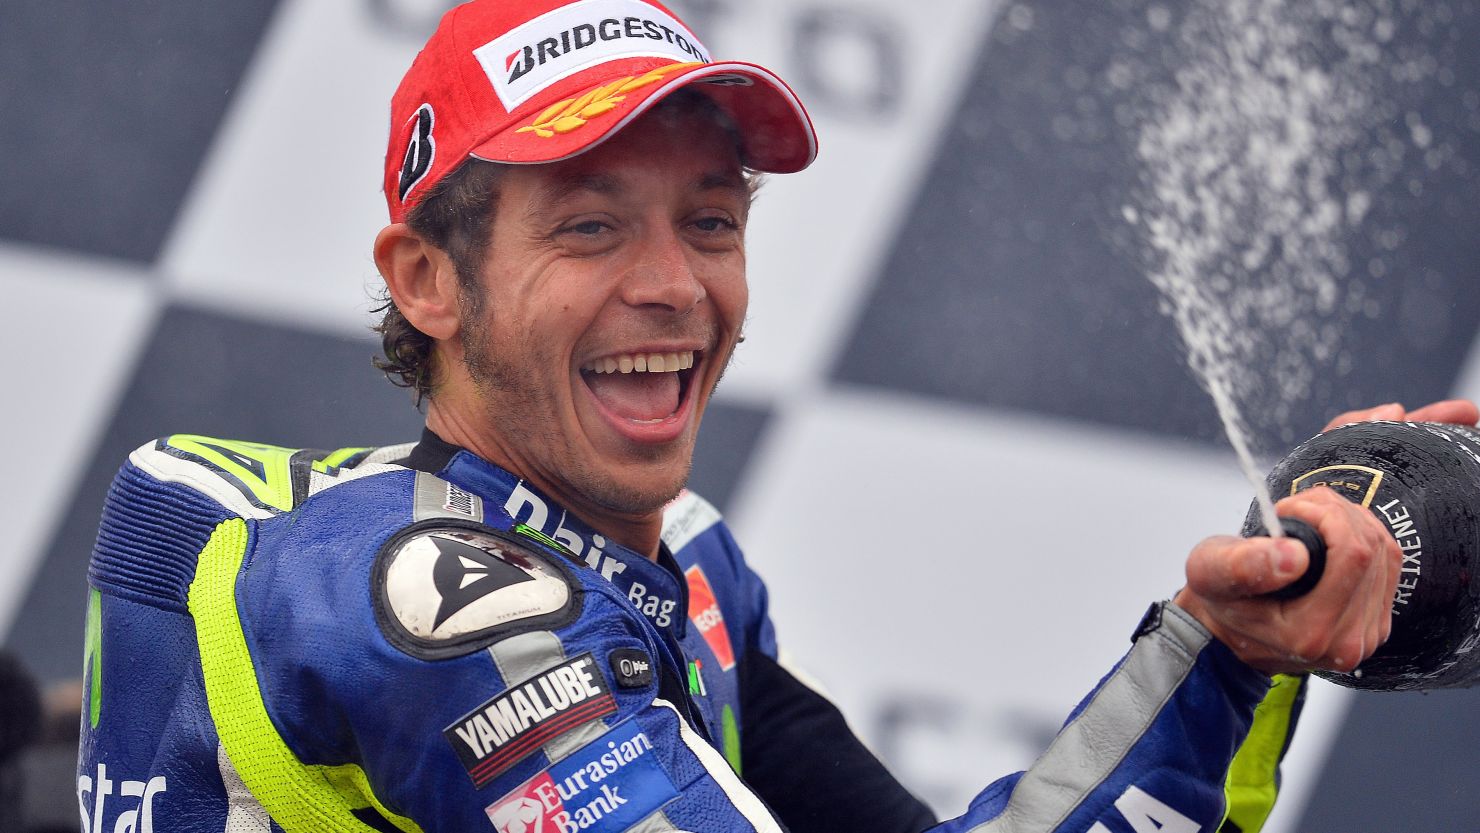 Valentino Rossi celebrates his fourth victory of the season after winning the British MotoGP at Silverstone. 